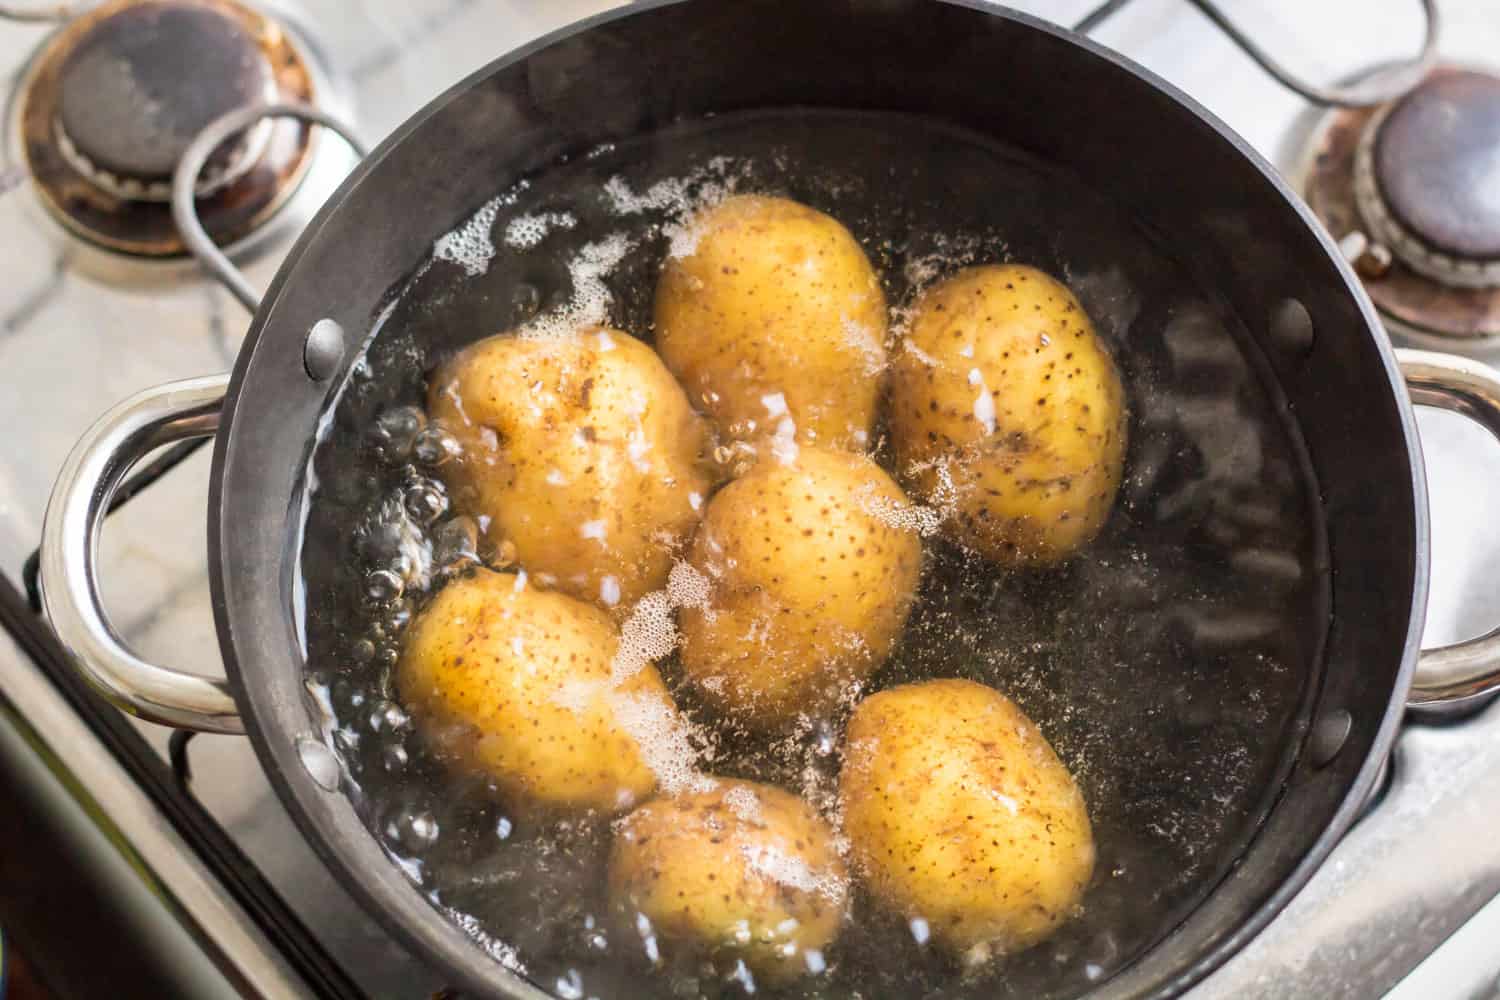 Potatoes being boiled on a saucepan under high heat